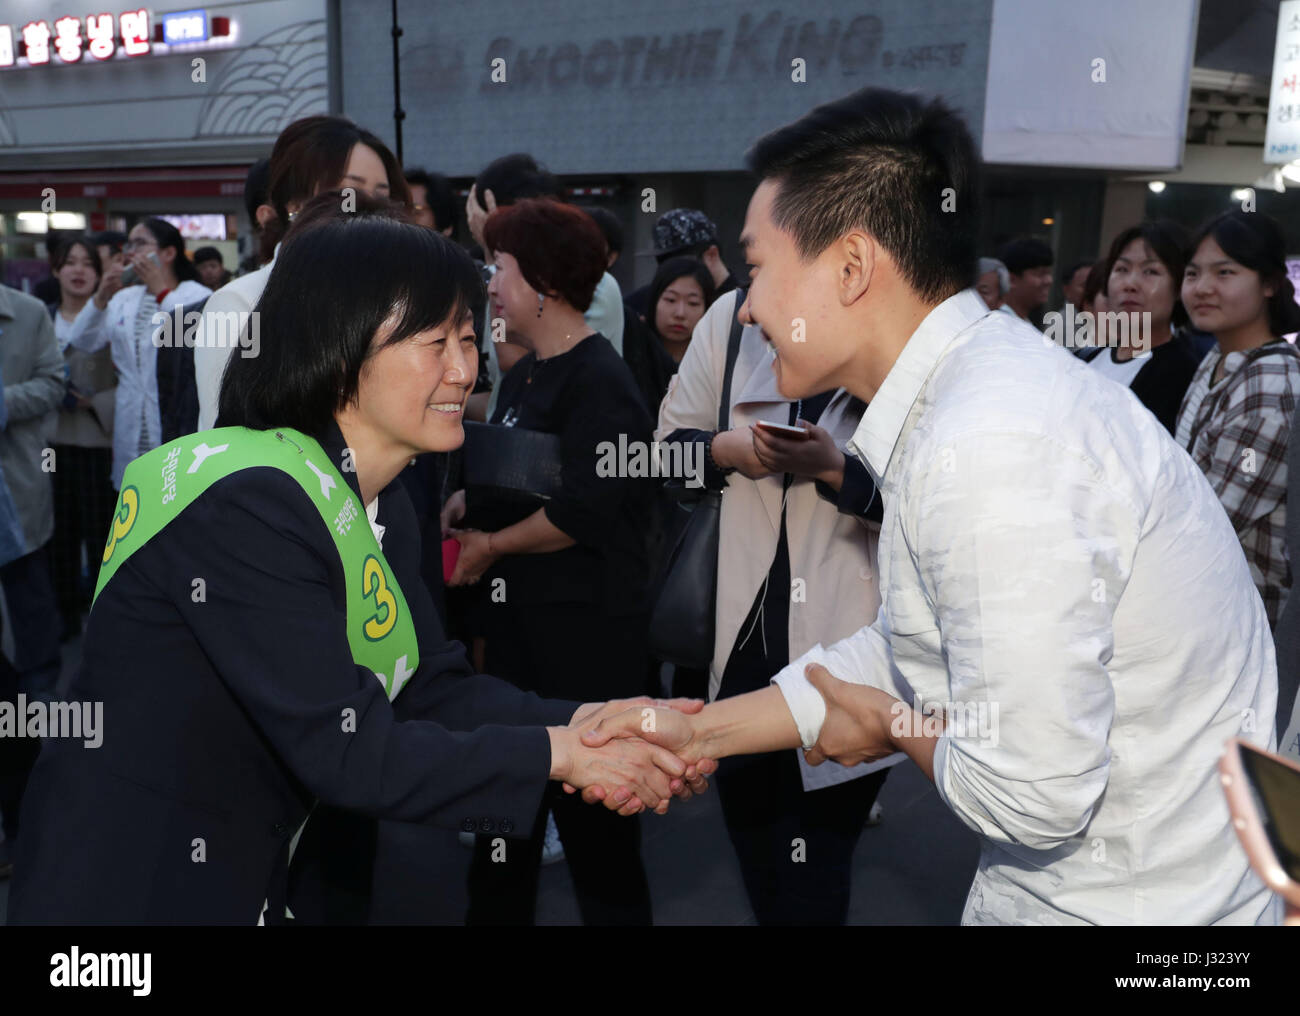 Seoul, Presidential election in Seoul. 2nd May, 2017. Kim Mi-kyung (L), wife of Ahn Cheol-soo, pesidential candidate of People's Party, shakes hands with supporters during a campaign for the upcoming Presidential election in Seoul, South Korea on May 2, 2017. South Korean presidential election will take place on May 9. Credit: Lee Sang-ho/Xinhua/Alamy Live News Stock Photo